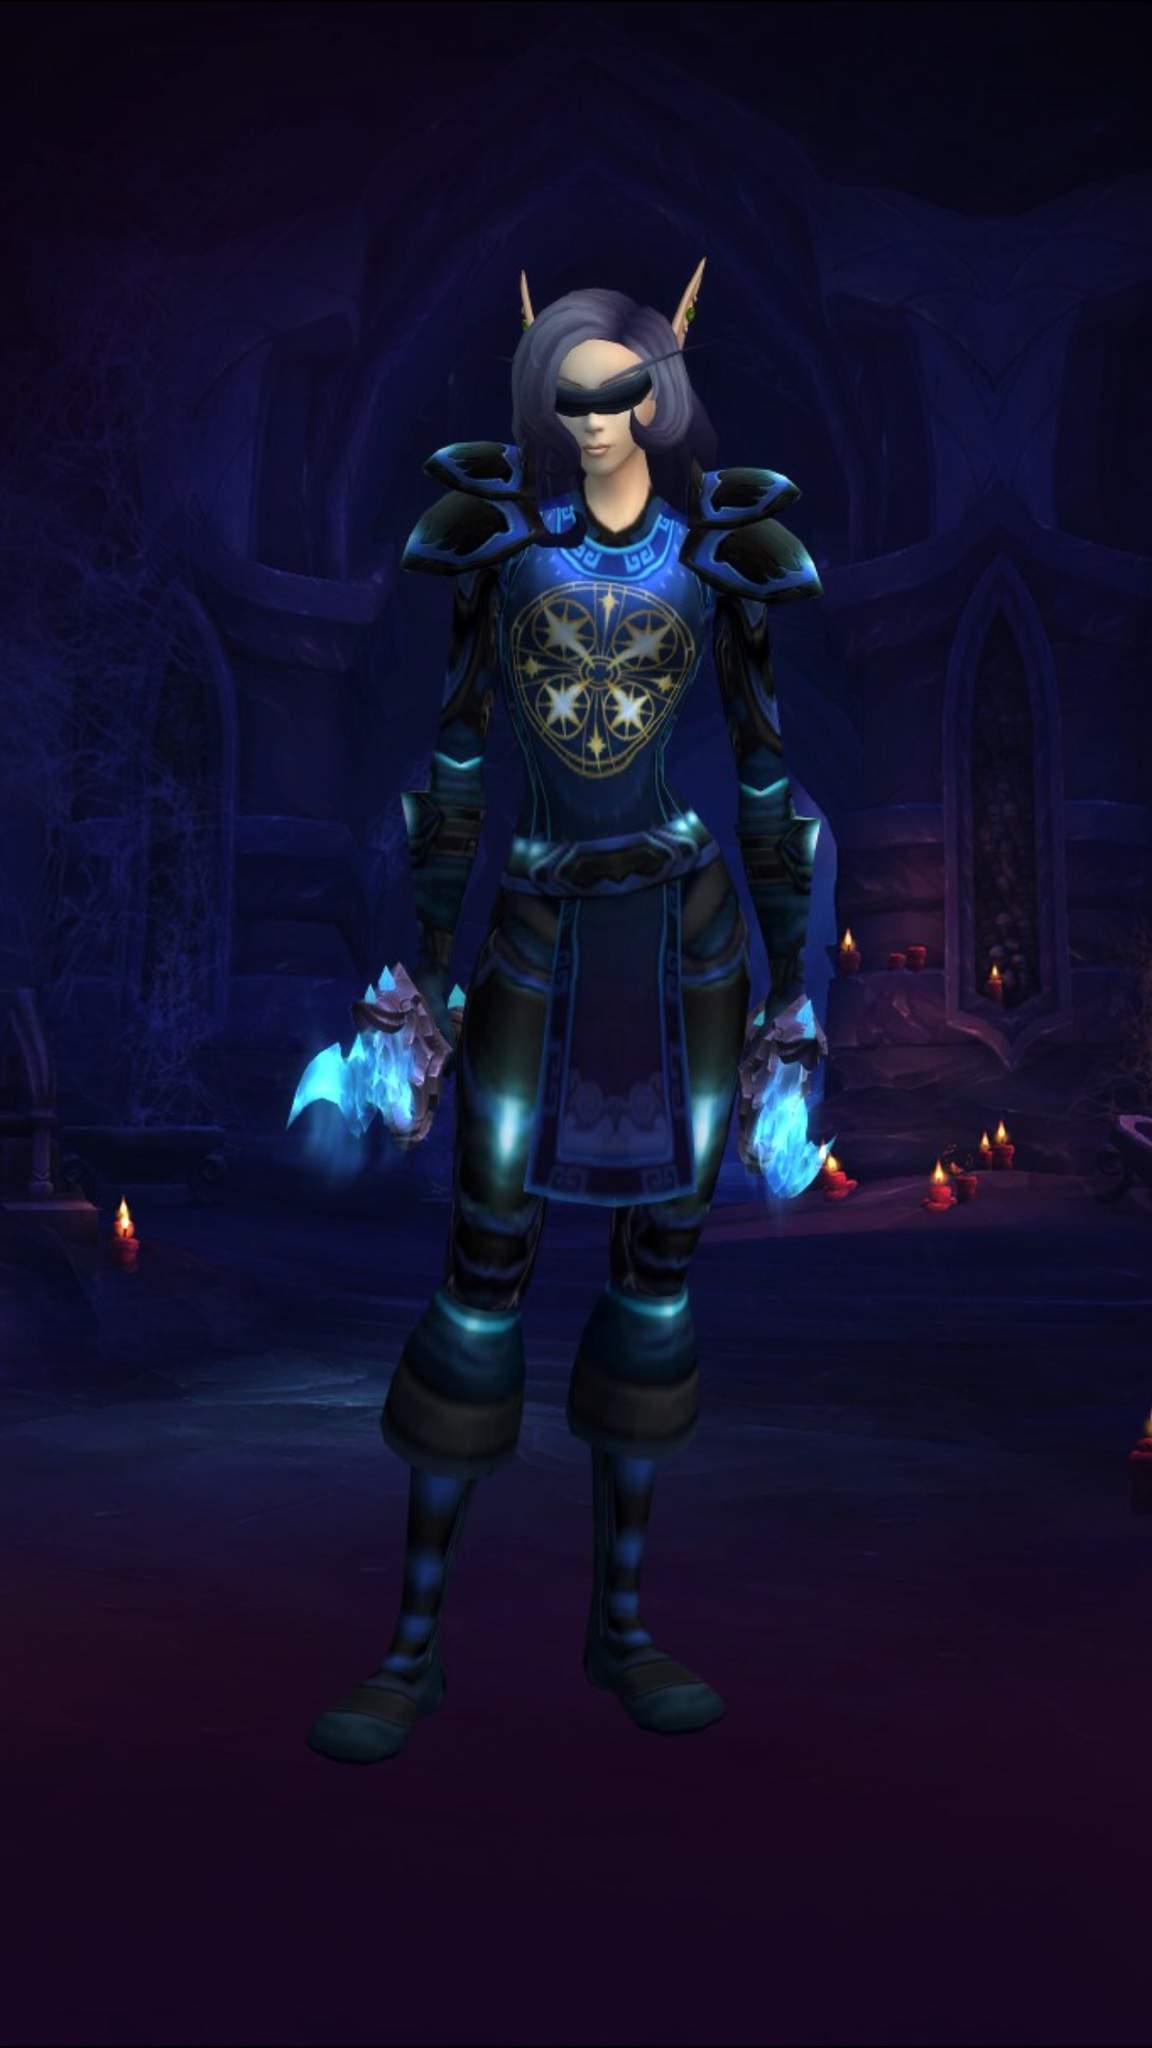 assassin rogue mage tower